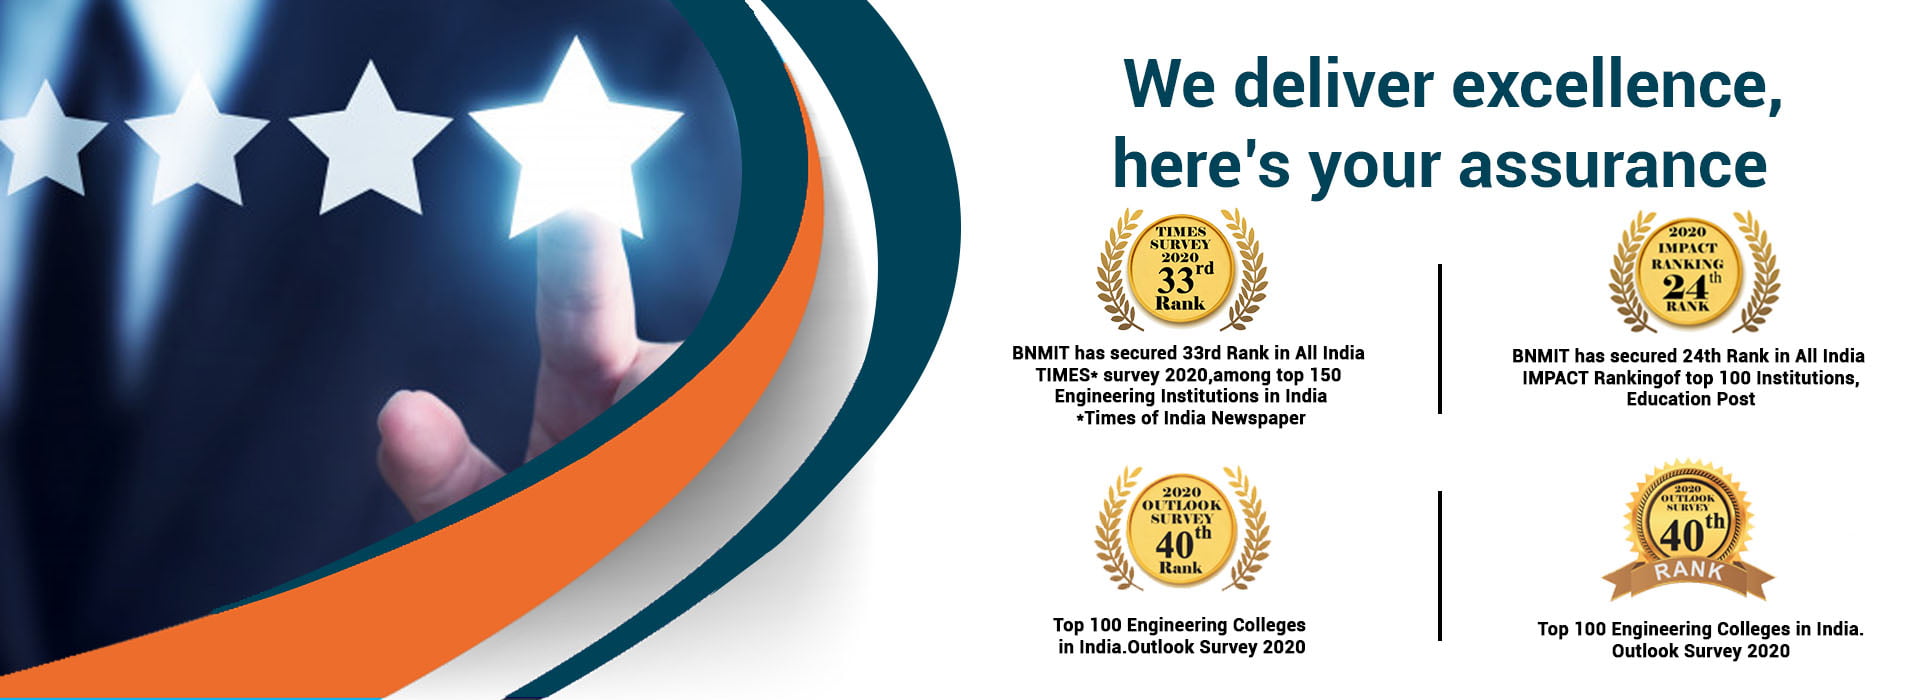 Excellence Award - BNMIT